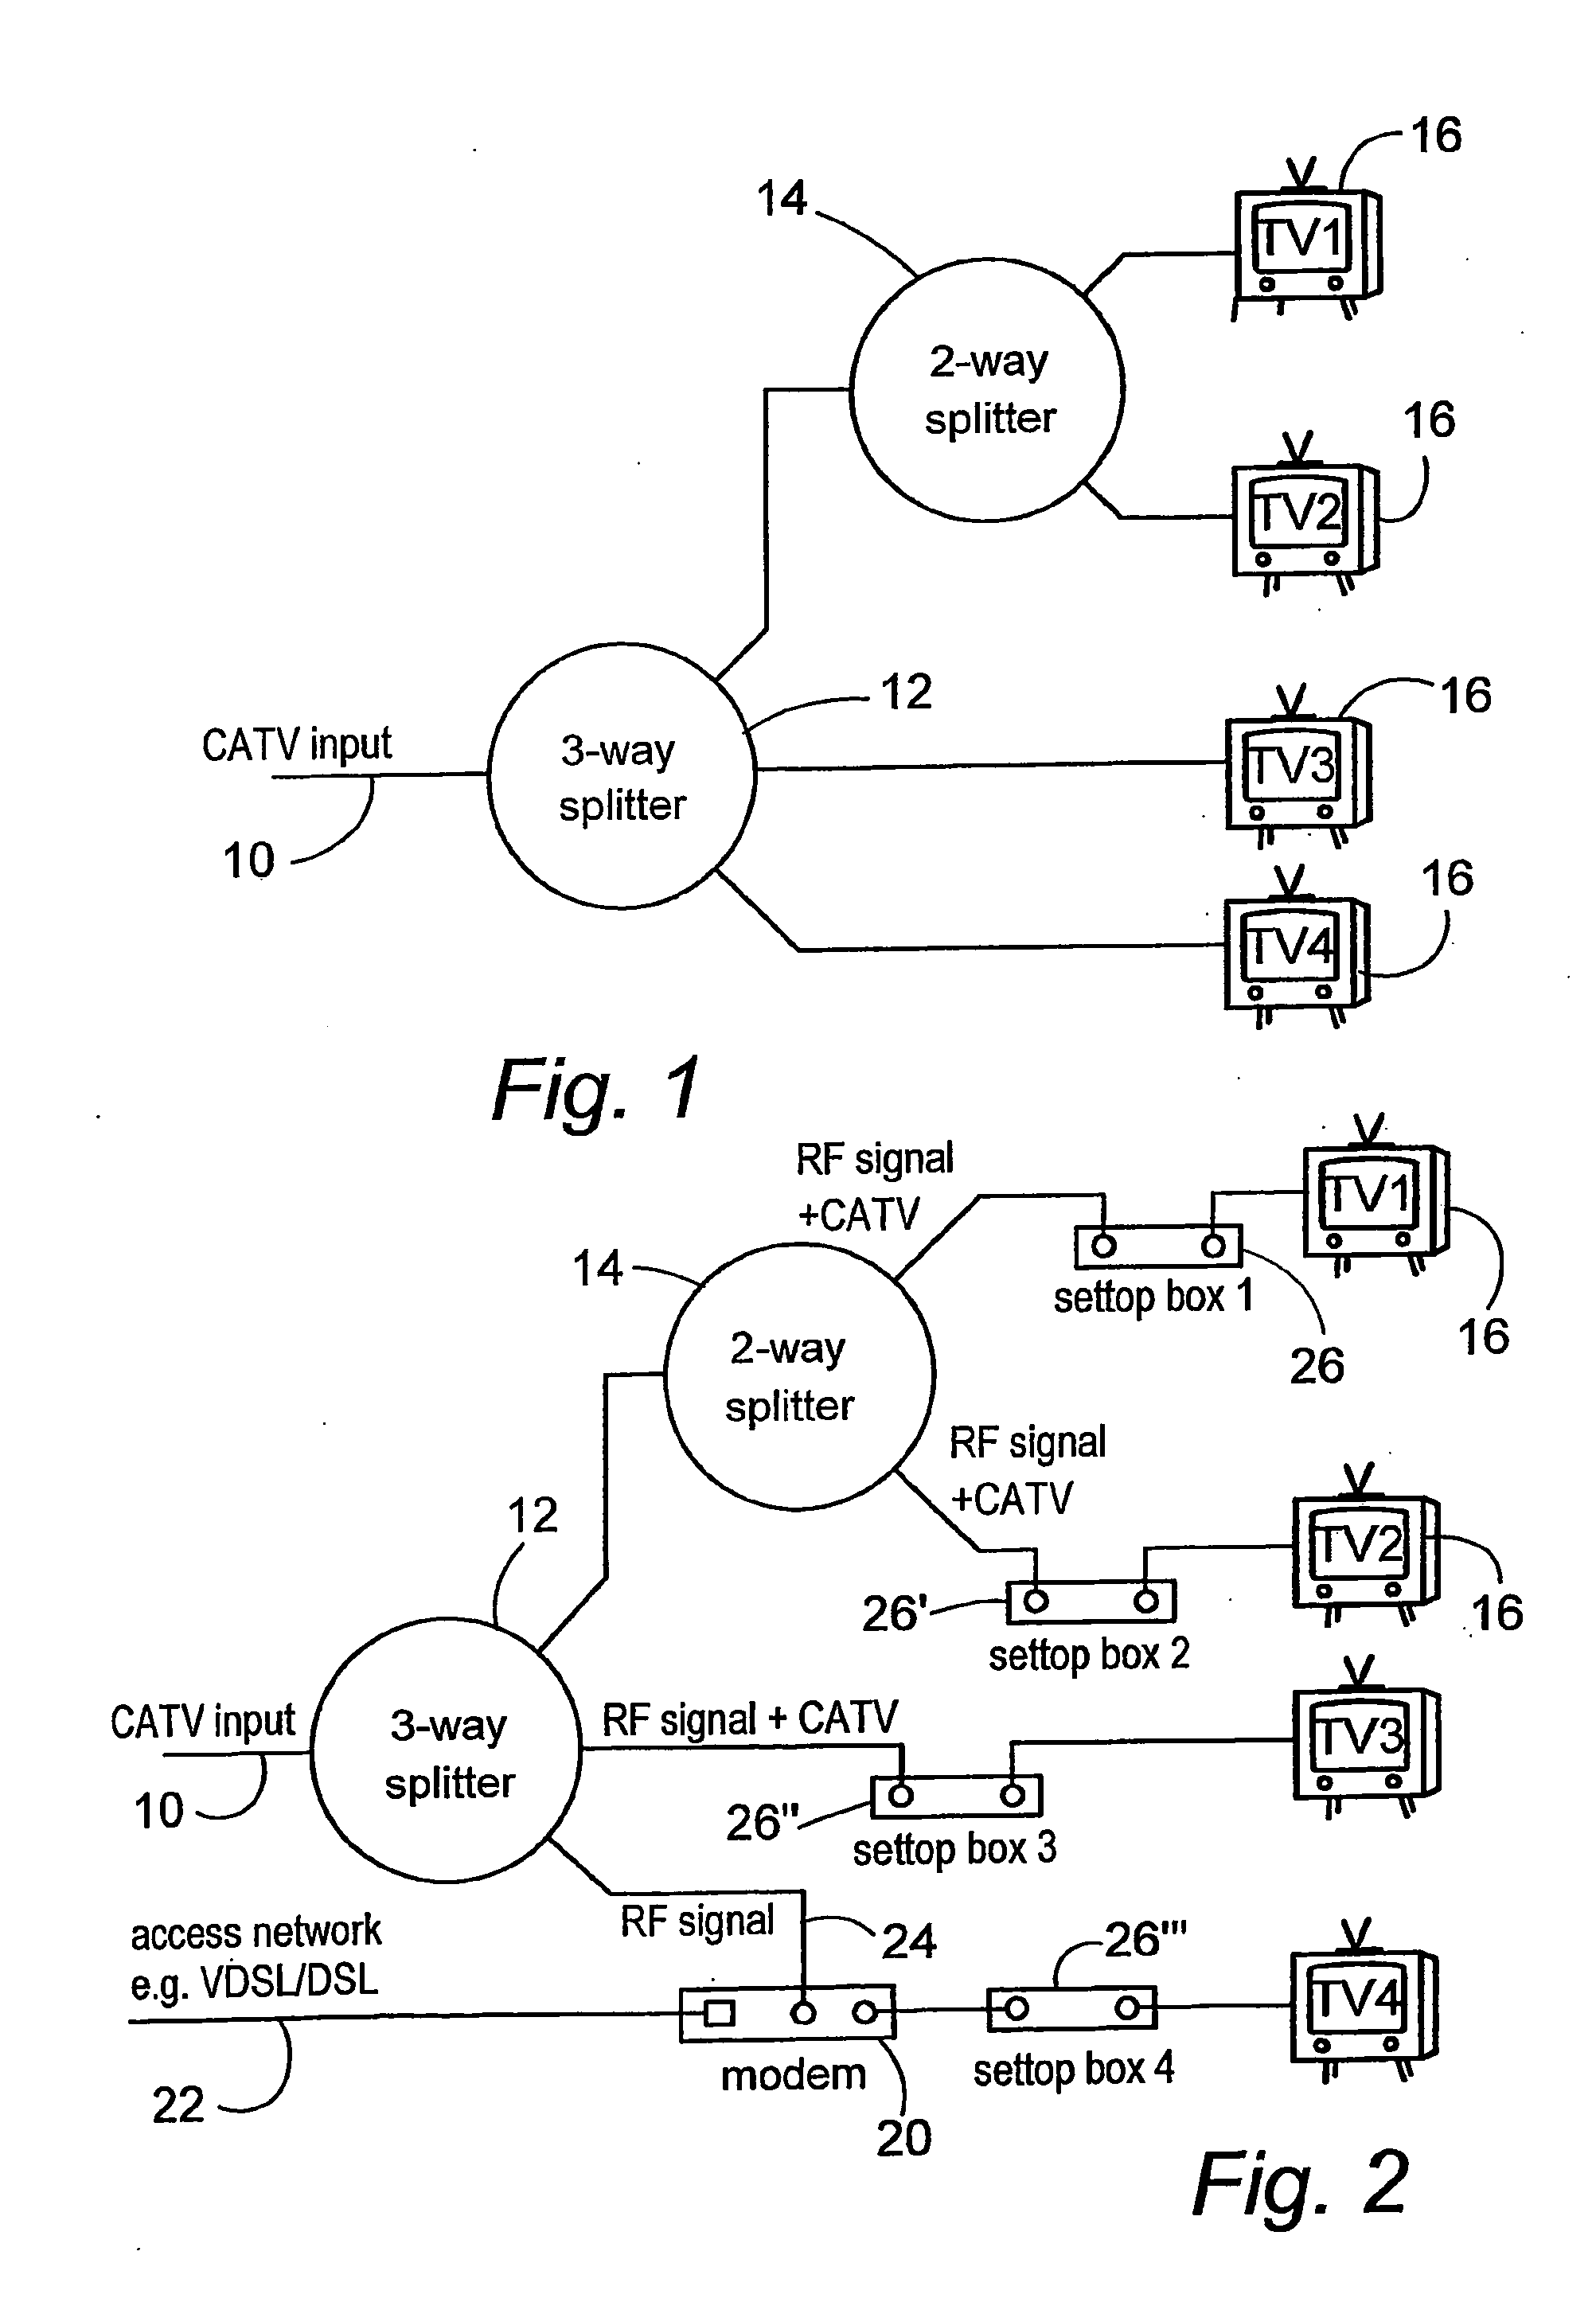 Loss reduction in a coaxial network